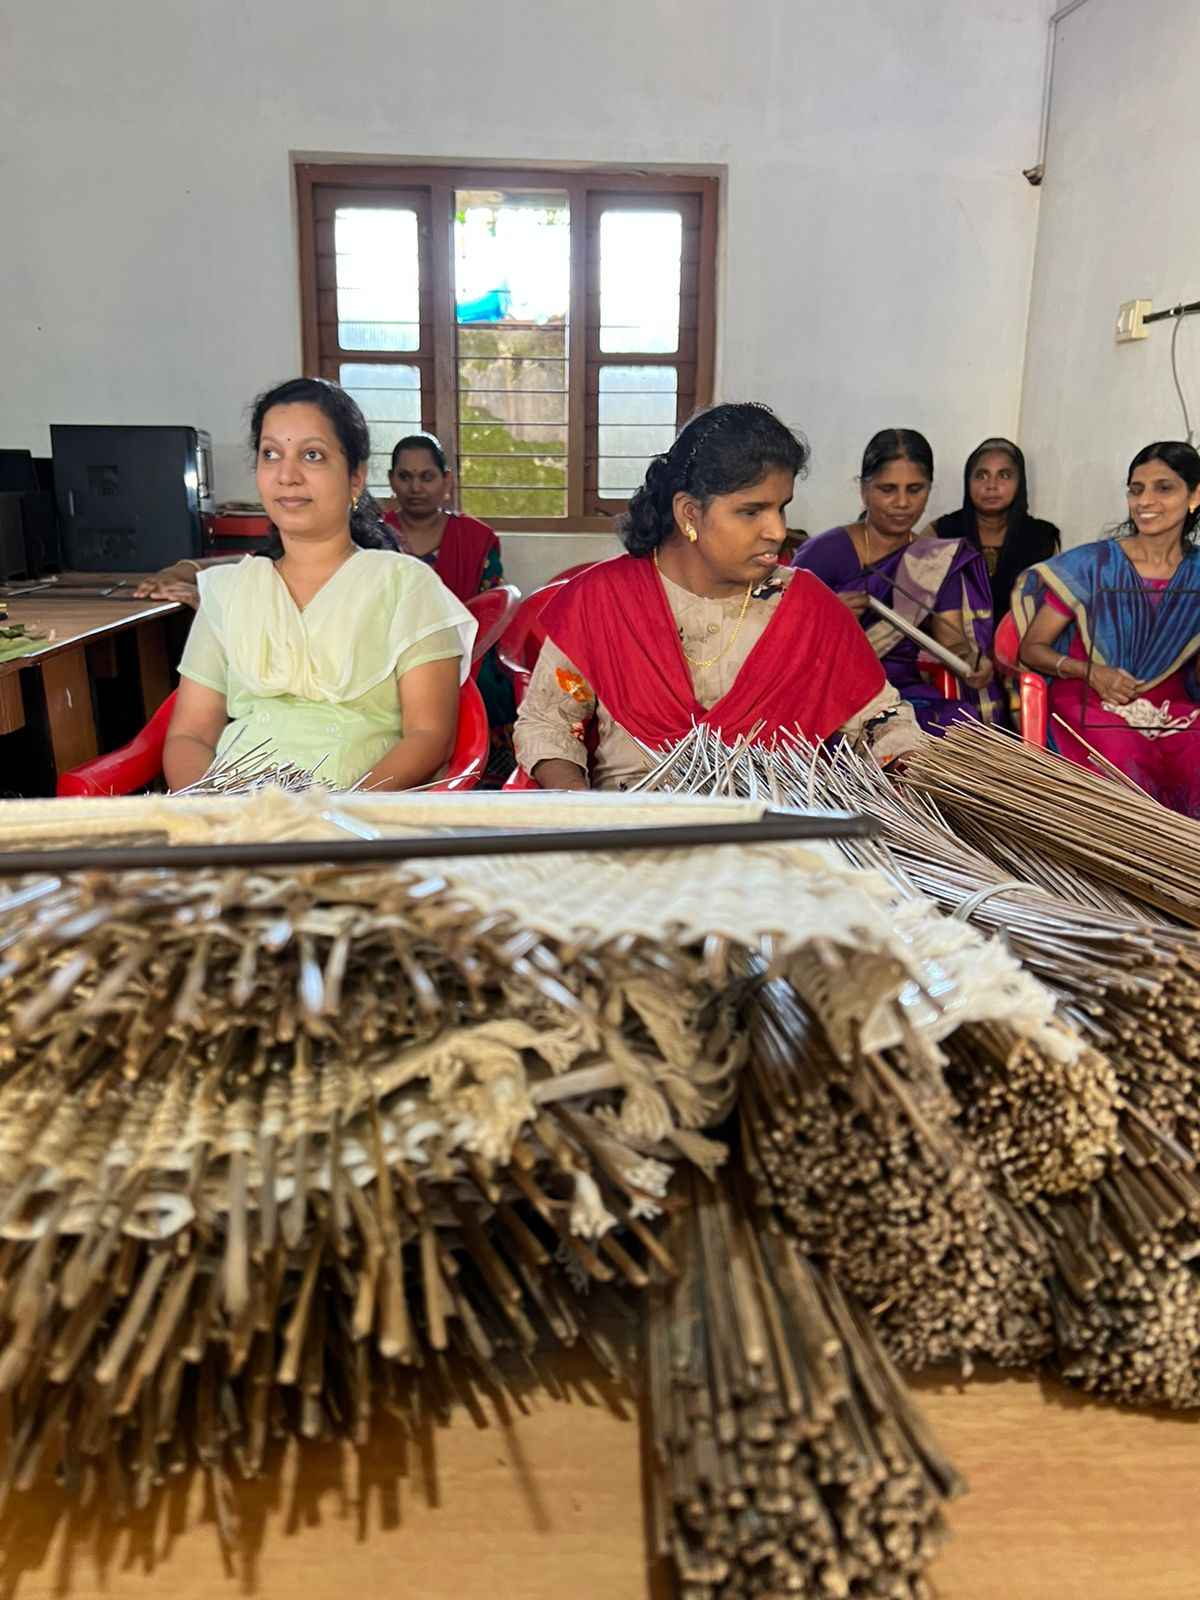 The yarn for the broomsticks is woven by visually impaired women at the Kerala Federation of the Blind